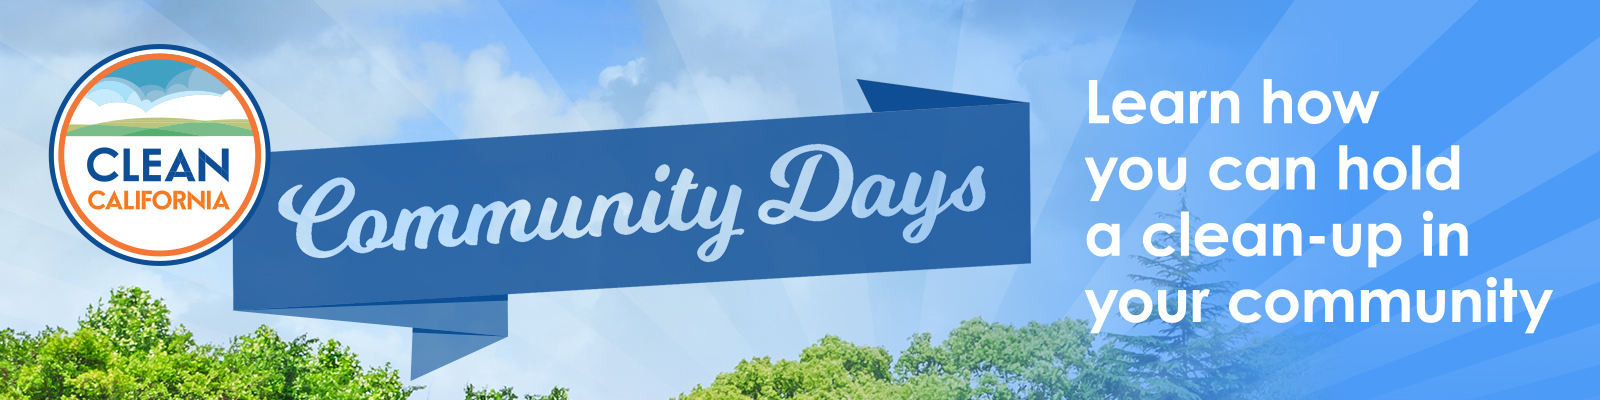 Clean California Community Days. Trees and sky in background. Learn how you can hold a clean-up in your community.